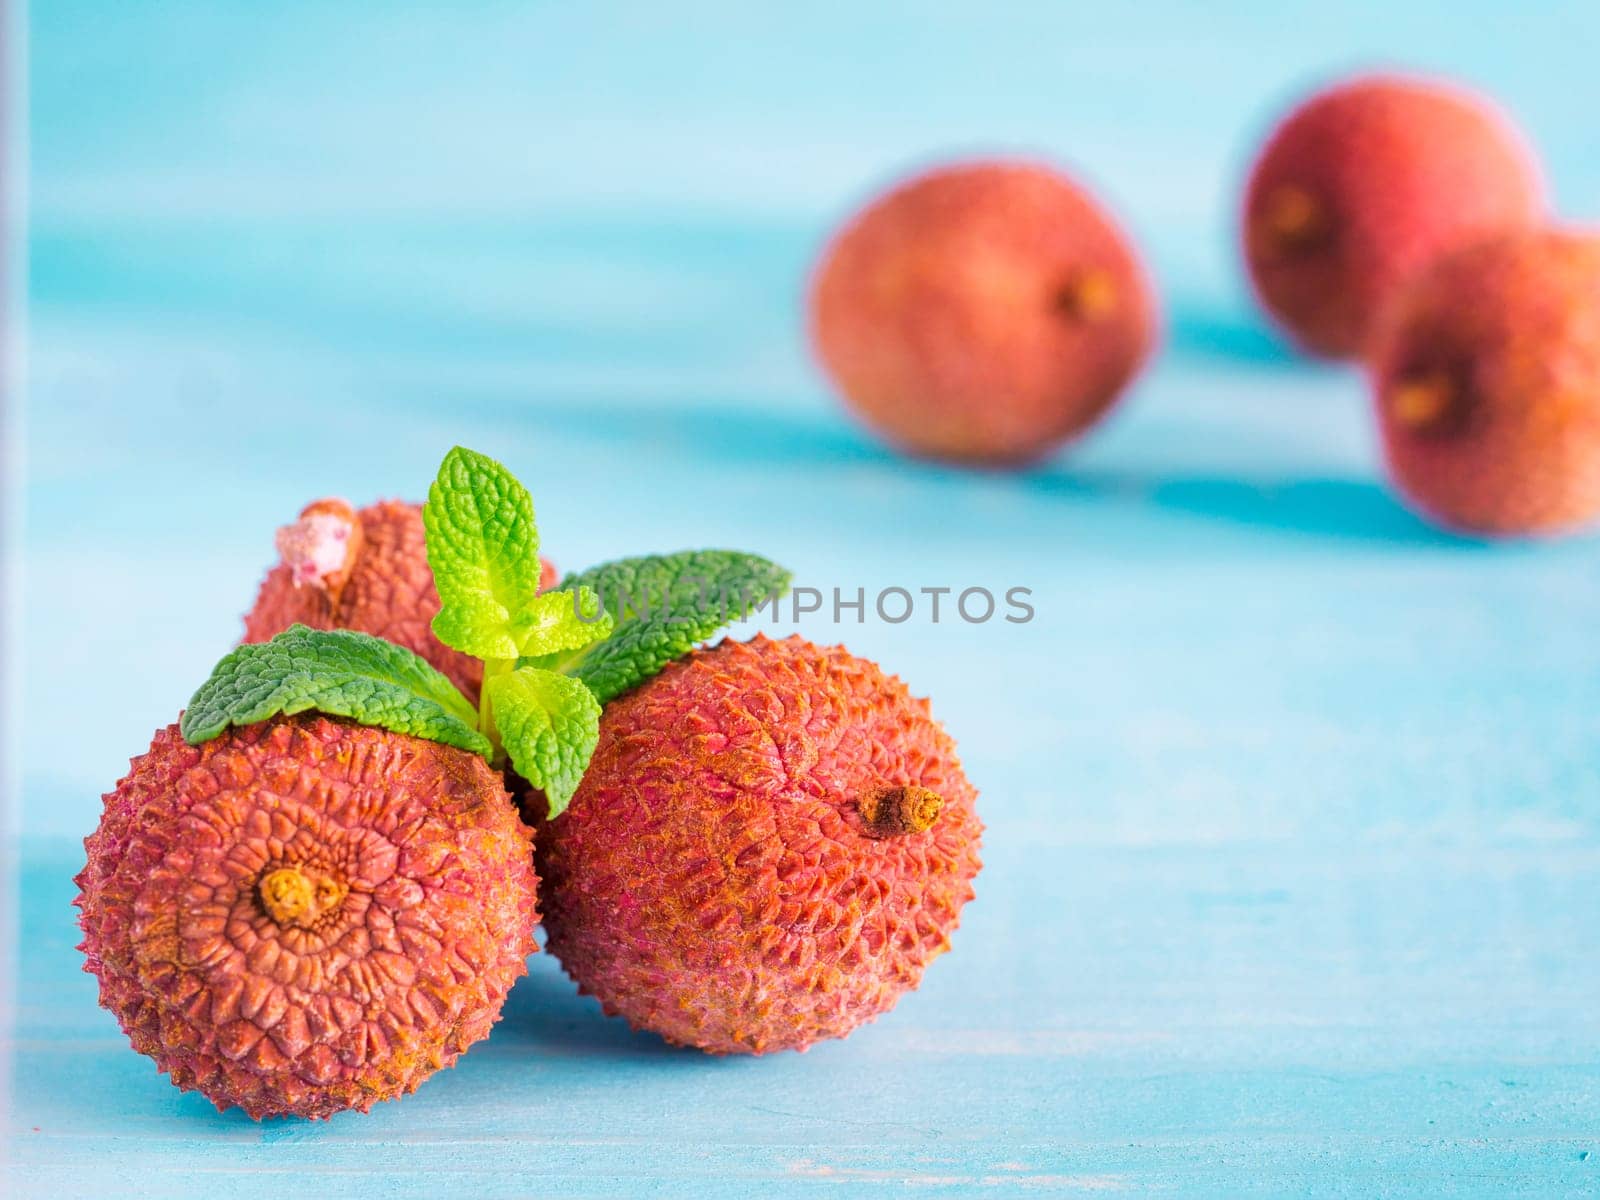 lichee fruit on turquoise wooden background close up